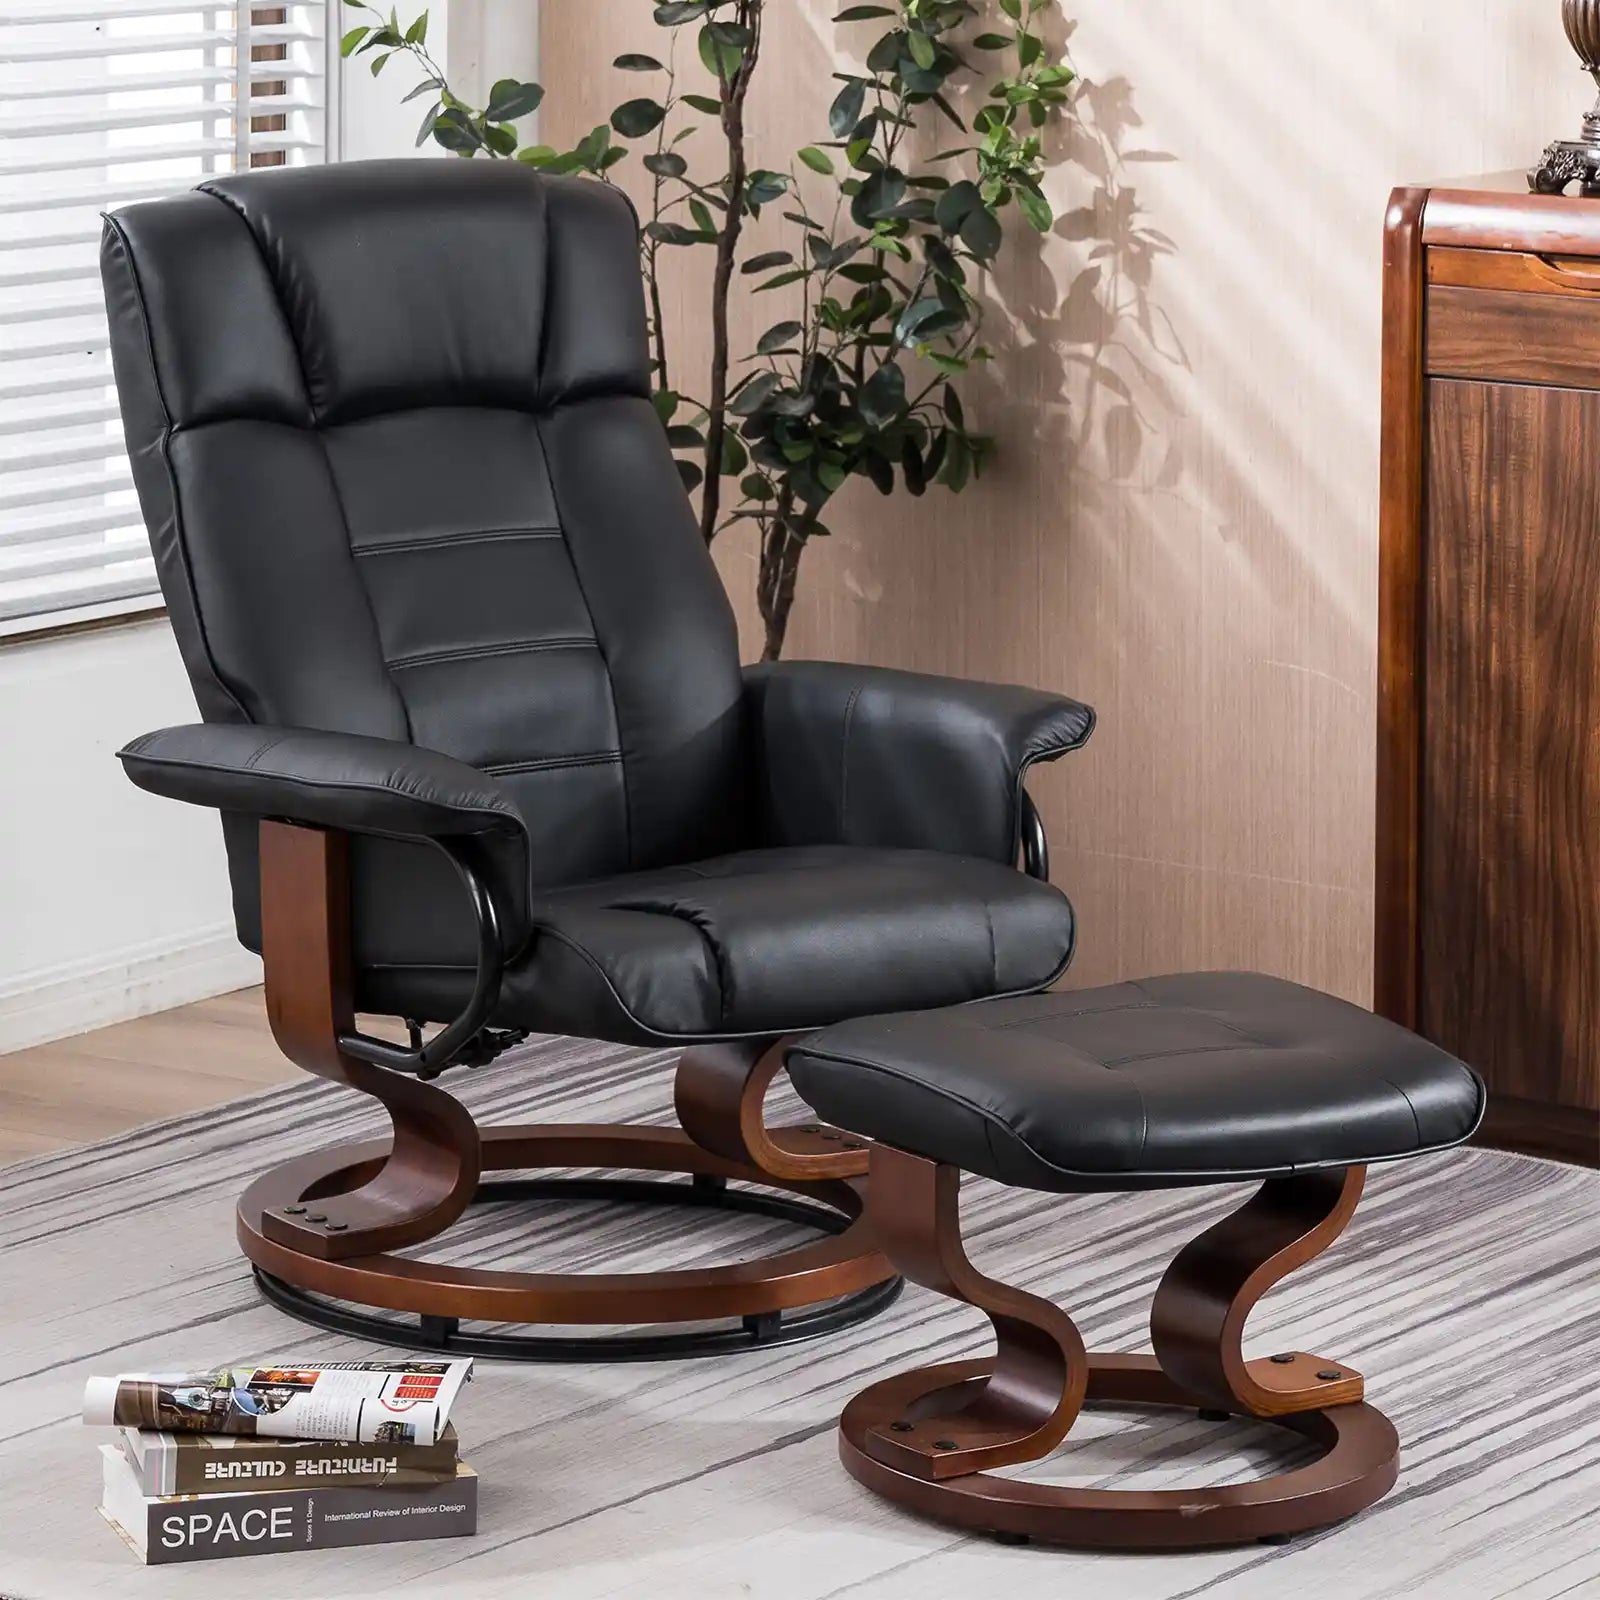 Recliner Arm Chair with Wrapped Wood Base and Ottoman Footrest